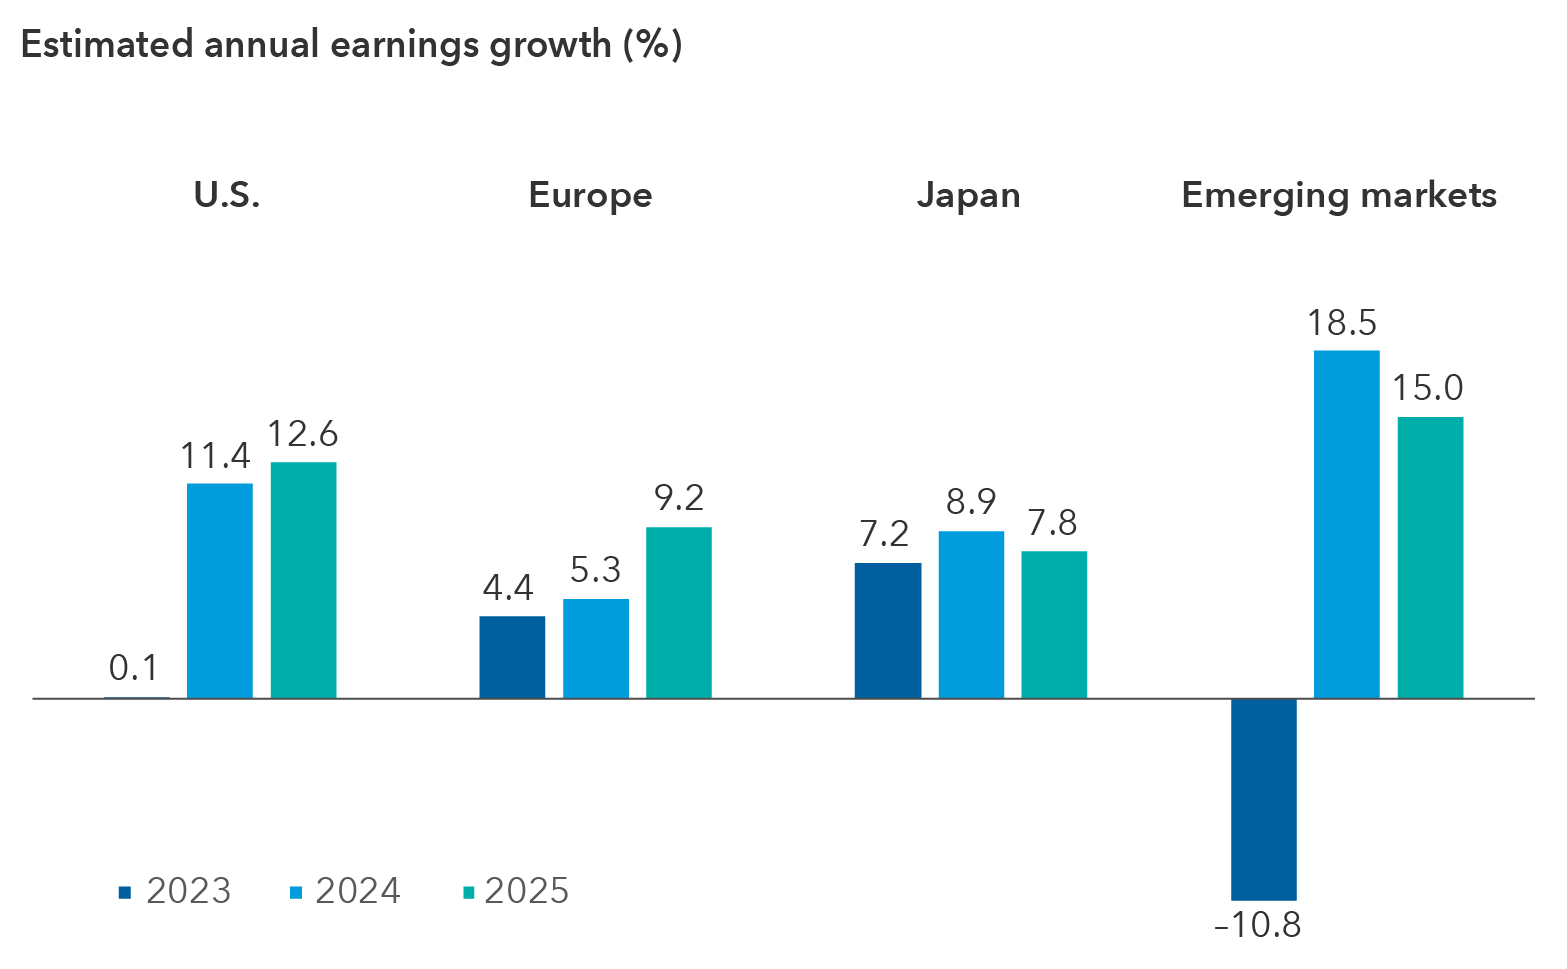 Bar chart shows estimated earnings growth for 2023, 2024 and 2025. U.S. earnings growth represented by the S&P 500 was estimated at 0.1% for 2023, 11.4% for 2024 and 12.6% for 2025. European earnings growth represented by the MSCI Europe Index was estimated at 4.4% for 2023, 5.3% for 2024 and 9.2% for 2025. Japanese earnings growth represented by the MSCI Japan Index was estimated at 7.2% for 2023, 8.9% for 2024 and 7.8% for 2025. Emerging markets earnings represented by the MSCI Emerging Markets Index declined by an estimated 10.8% in 2023 – however, earnings are estimated to rise by 18.5% in 2024 and 15% in 2025. 